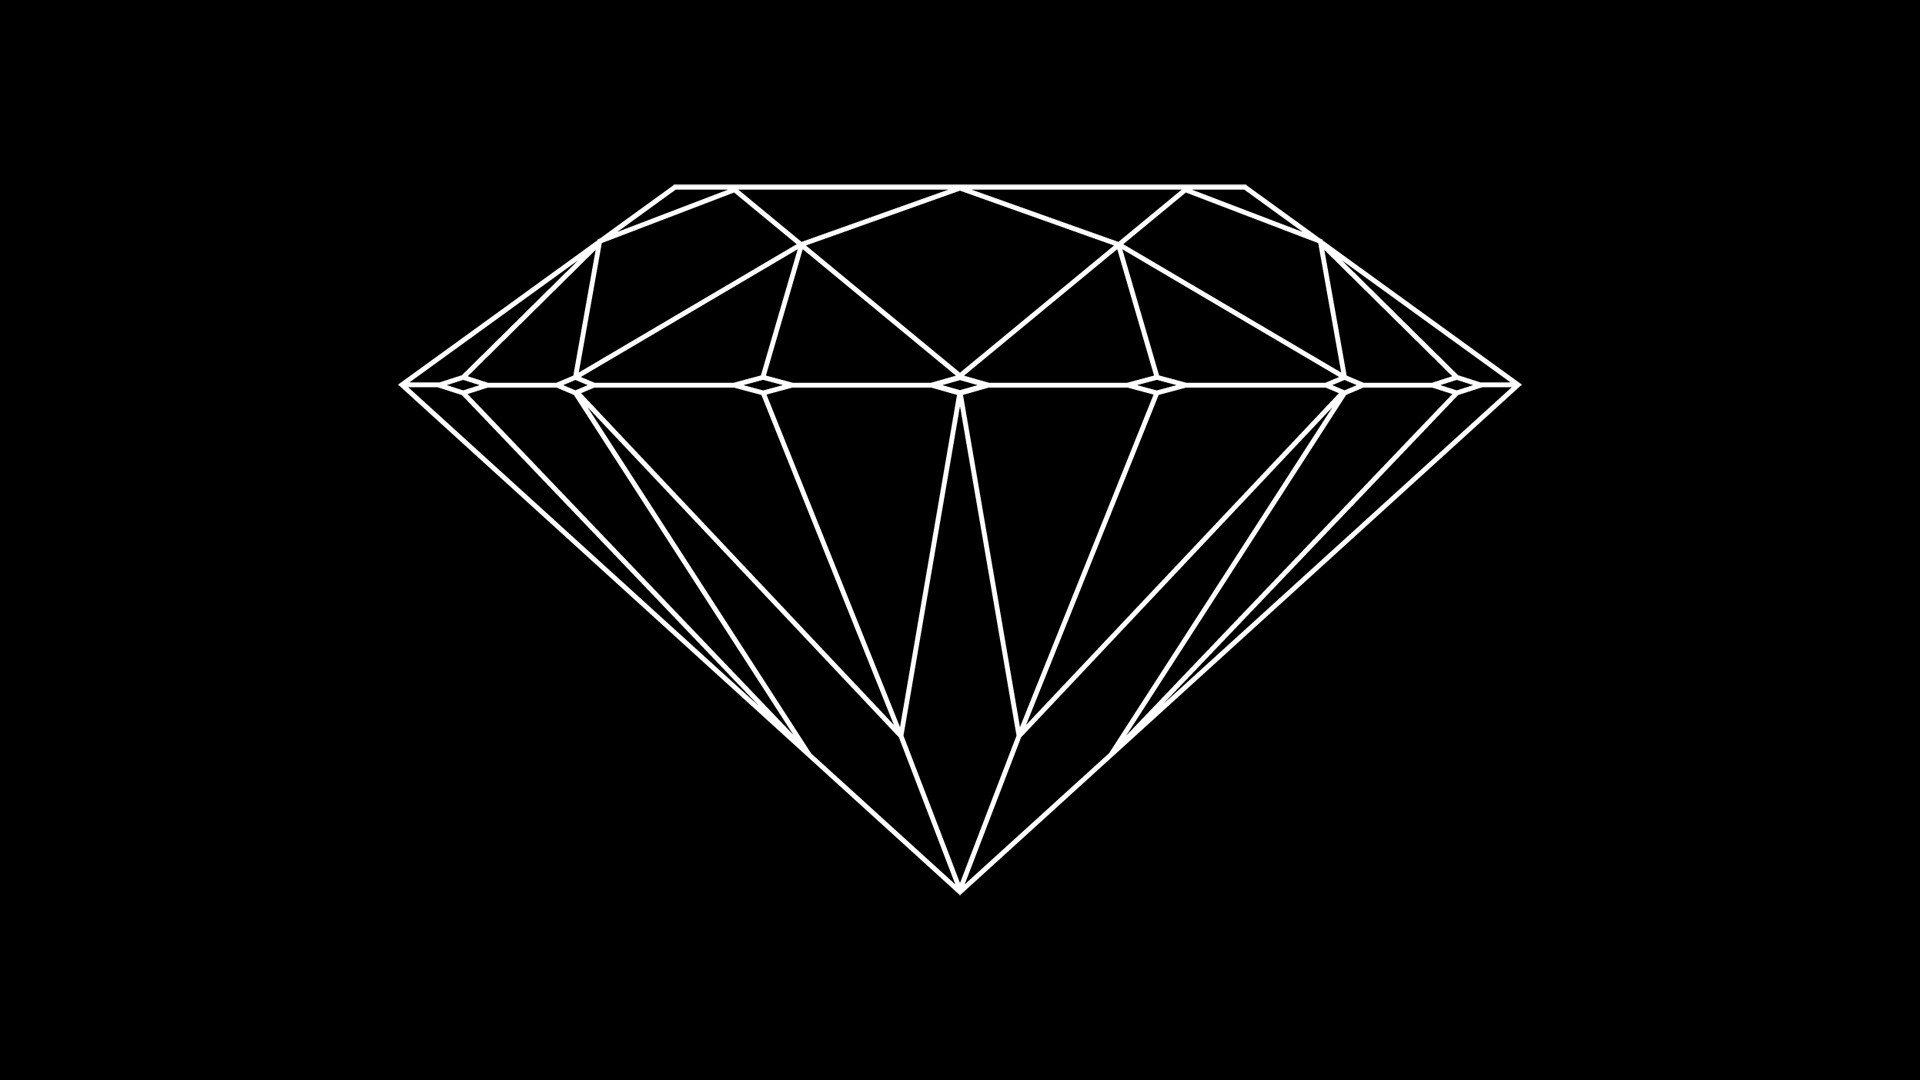 1920x1080 Diamond supply co wallpaper HD pictures download.